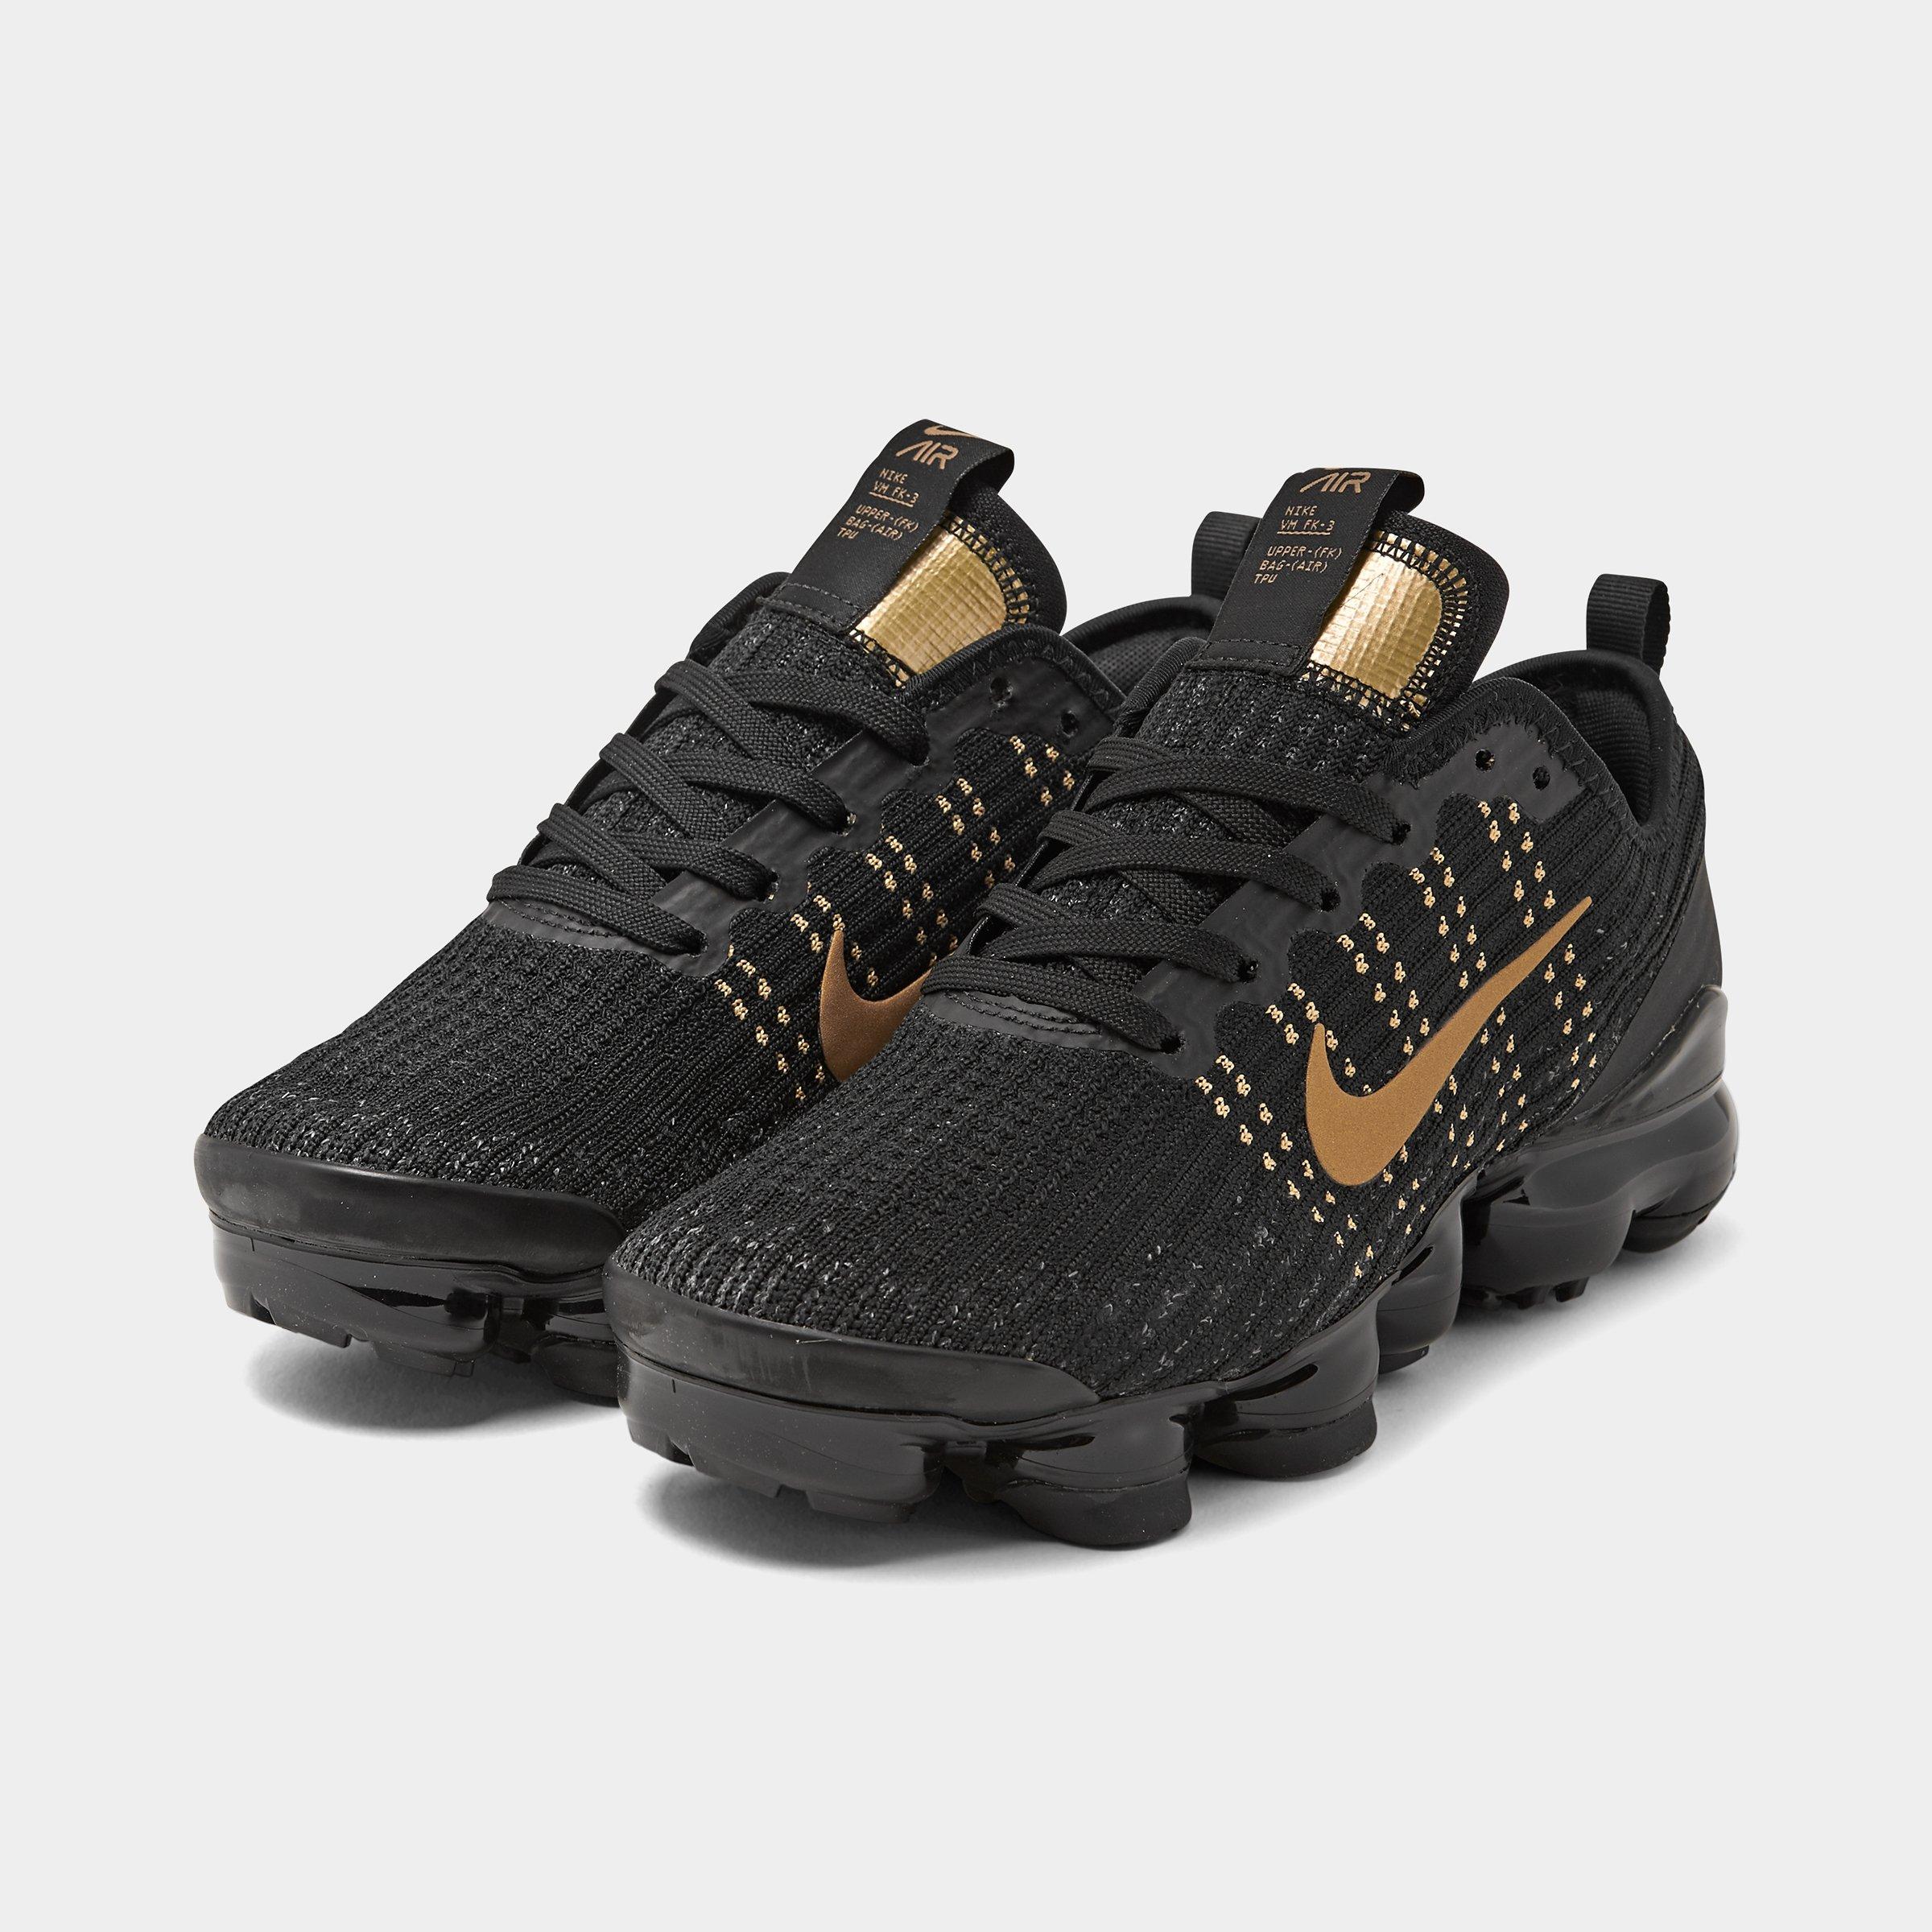 nike vapormax gold and black